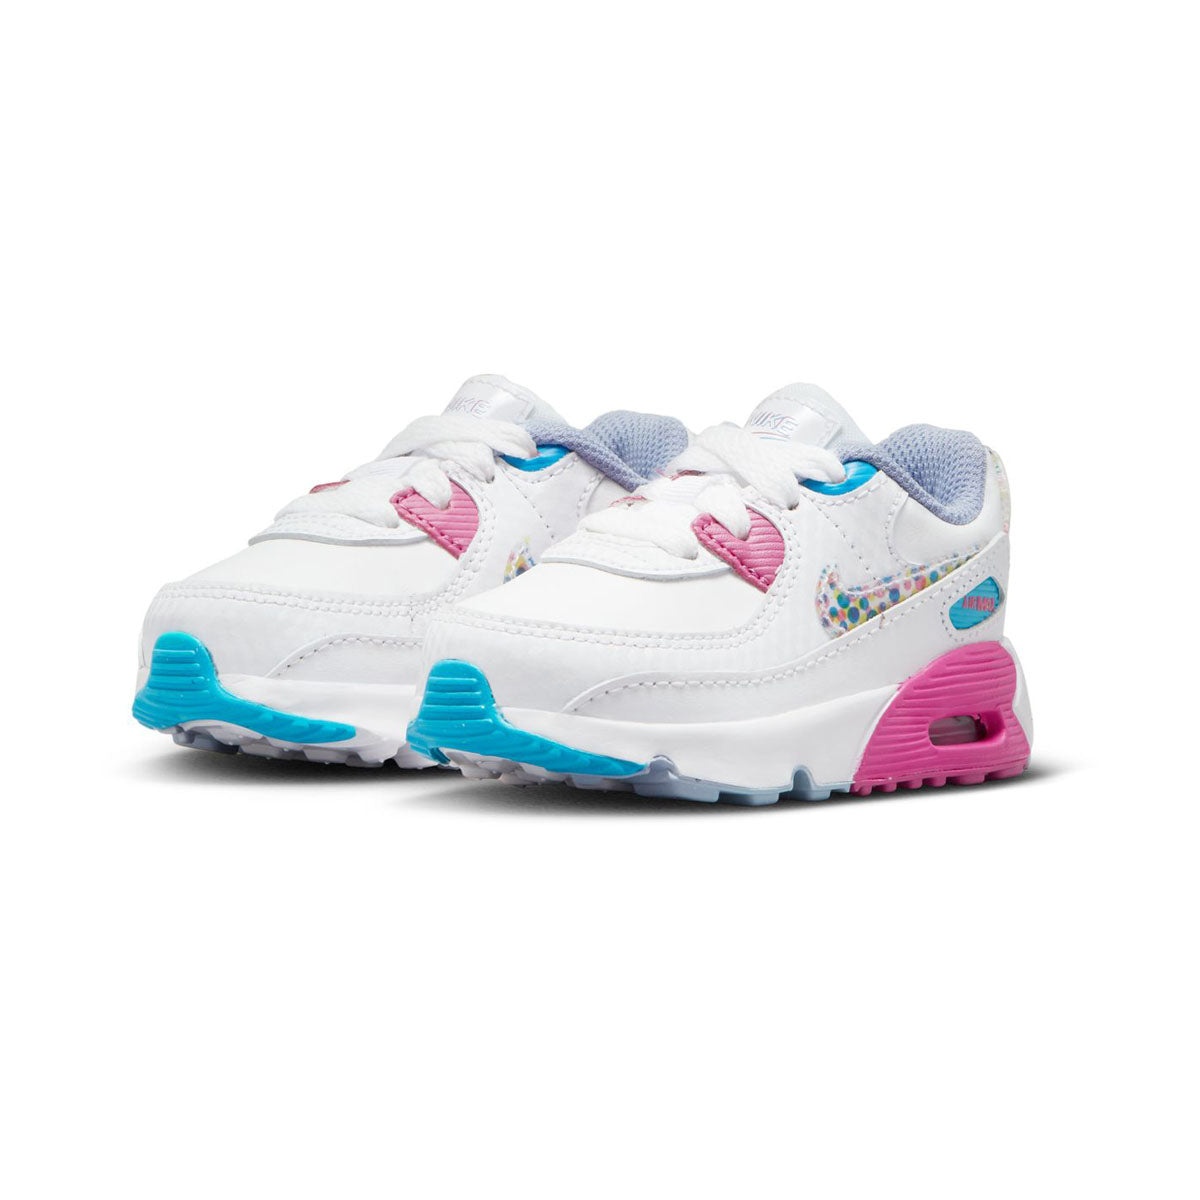 Nike Air Max 90 LTR SE Baby/Toddler Shoes